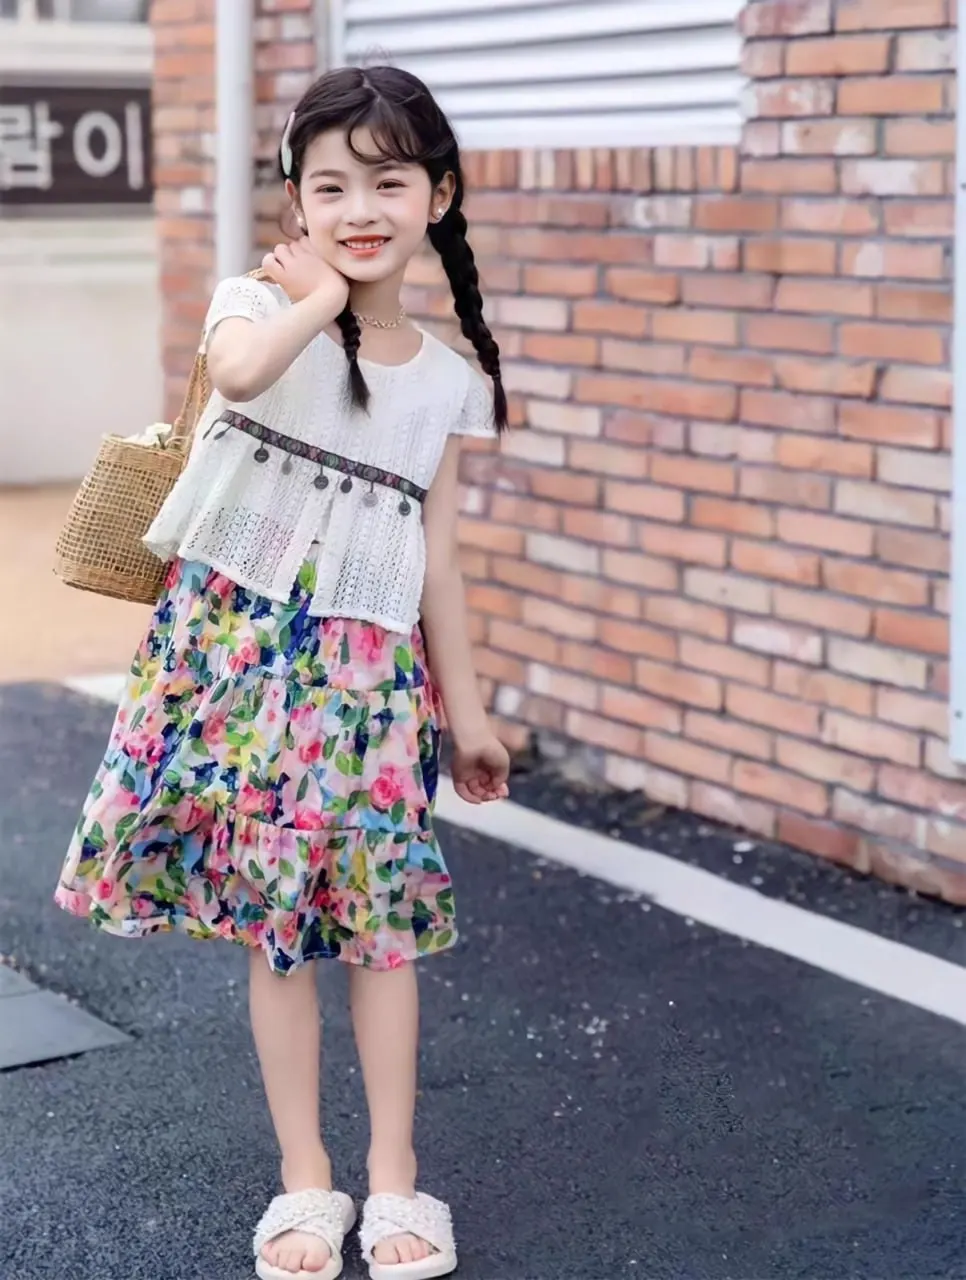 Hot selling girls dress summer dress western style skirt dress girls skirt fashion baby 3-8 years old material cotton material